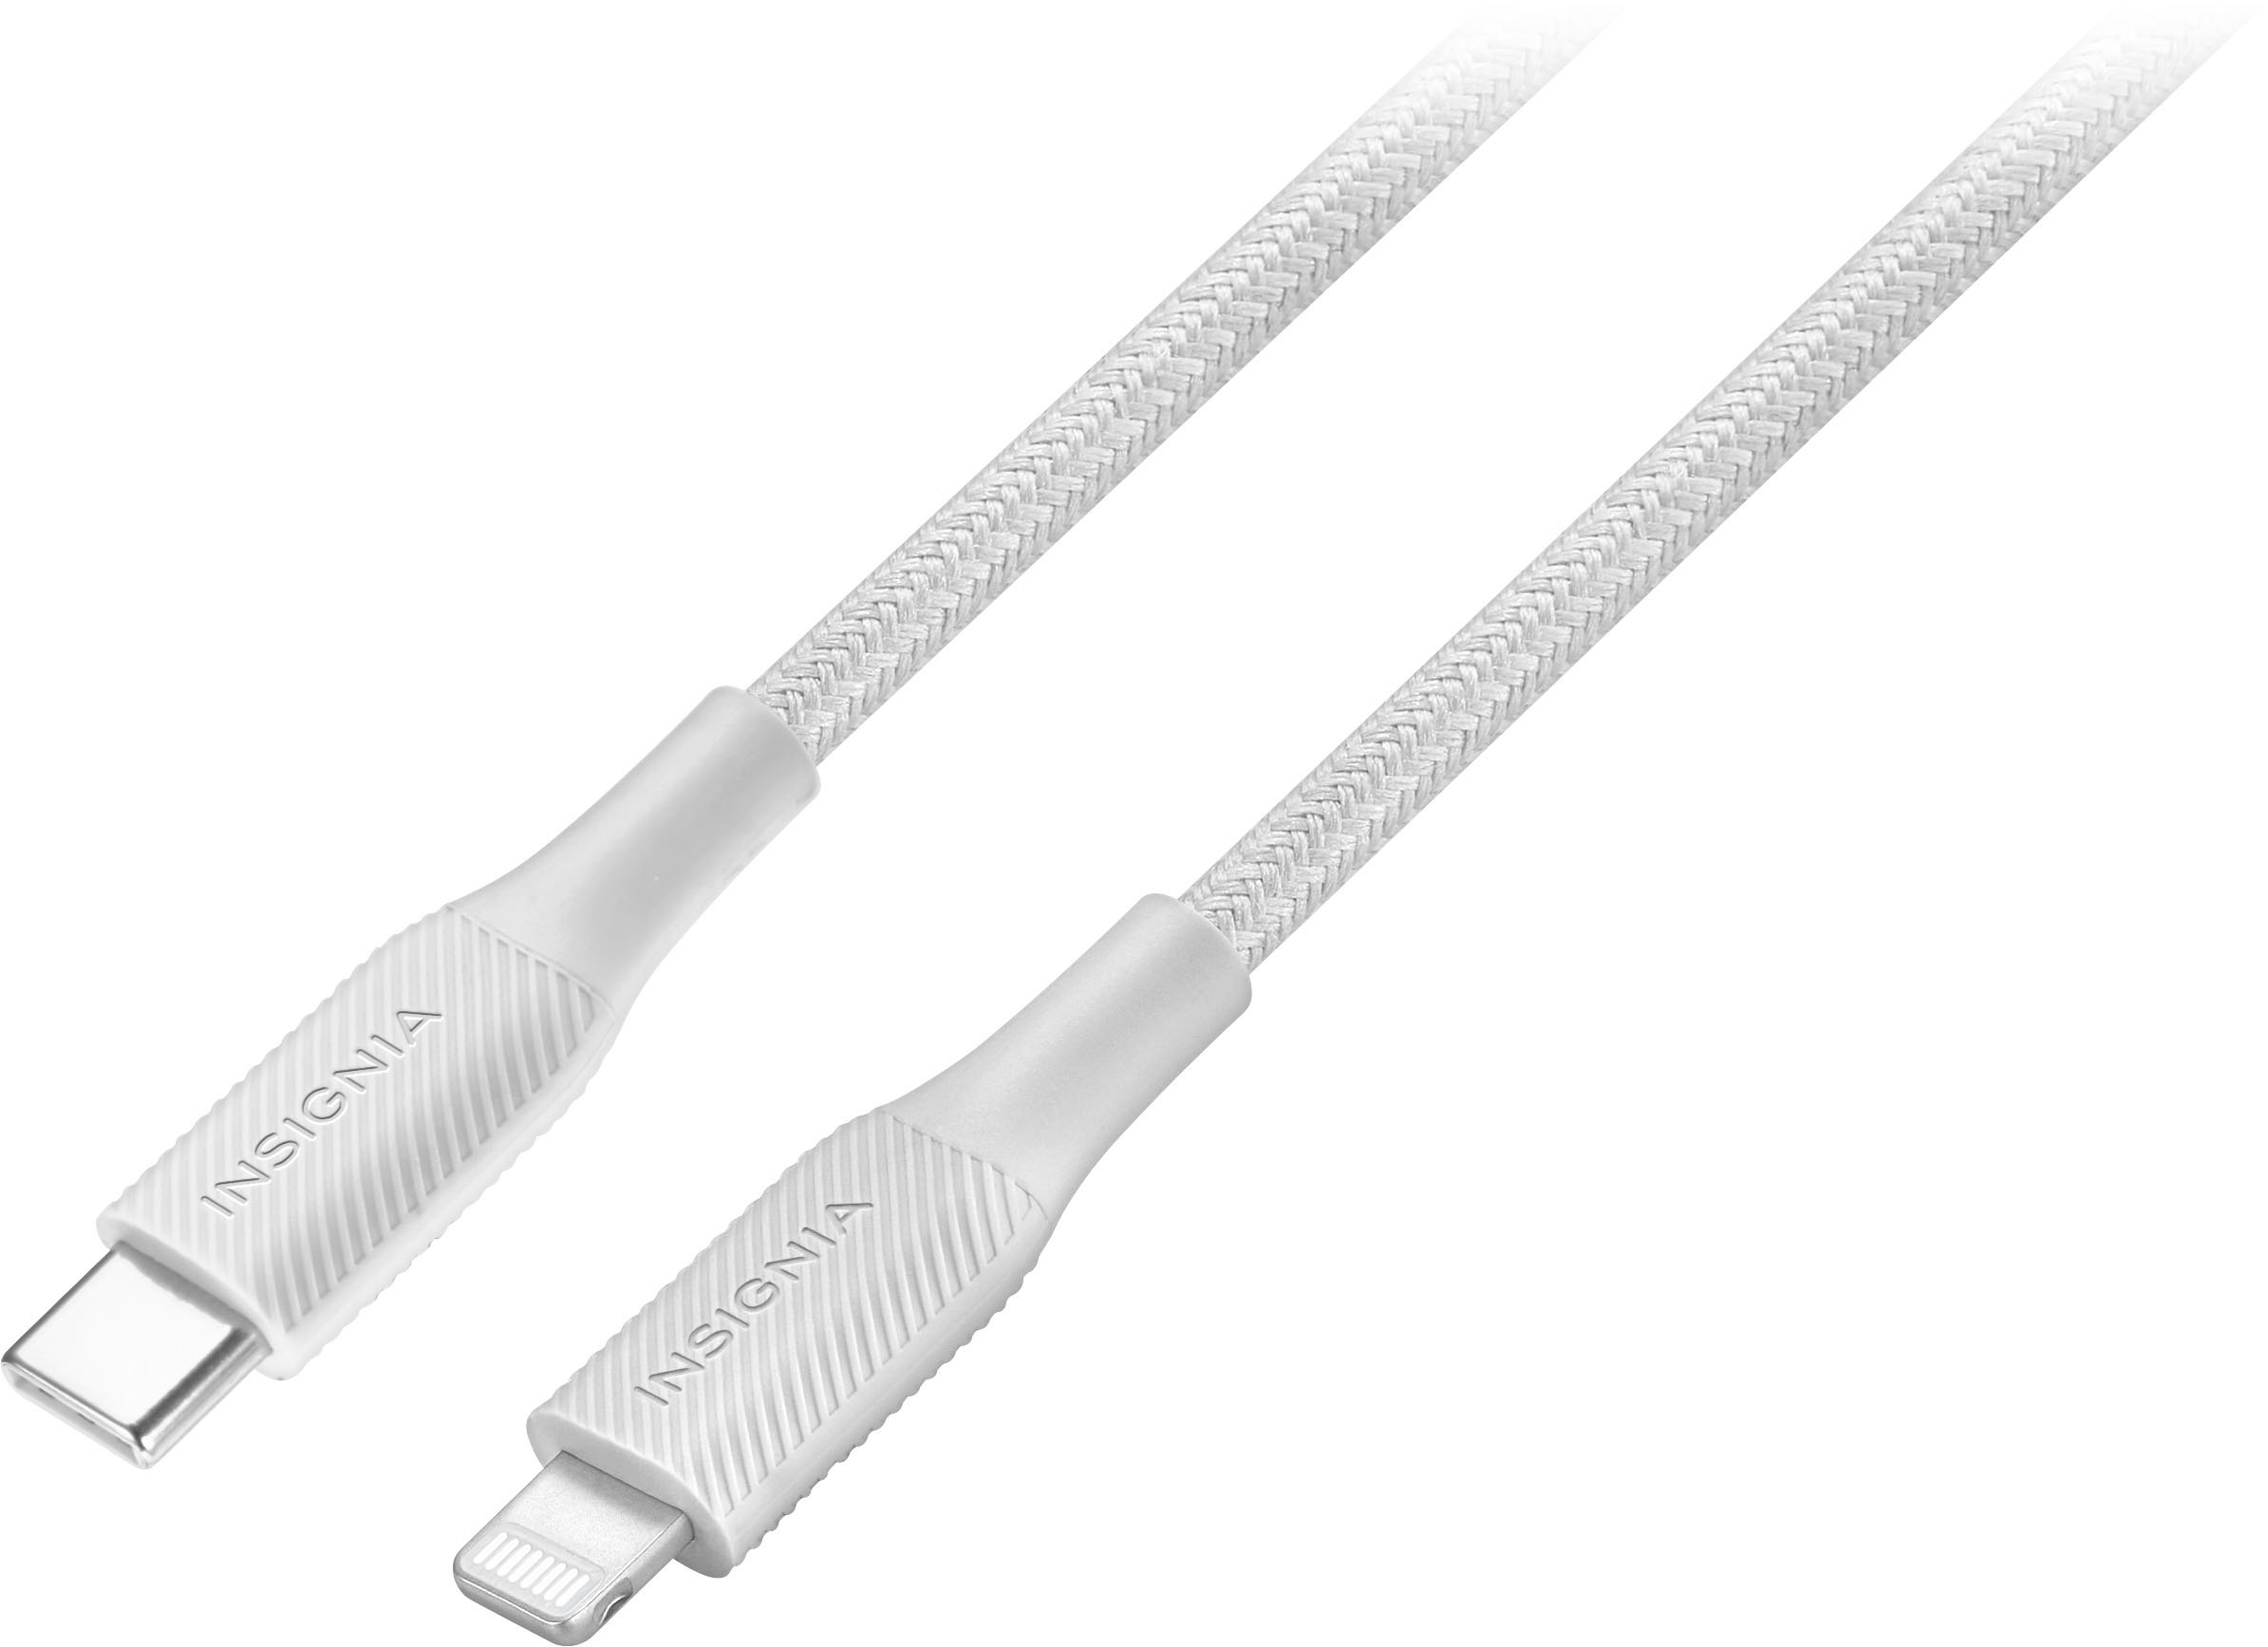 Left View: Snakable - Apple MFi Certified 4' Lightning USB Charging Cable - Cloud white